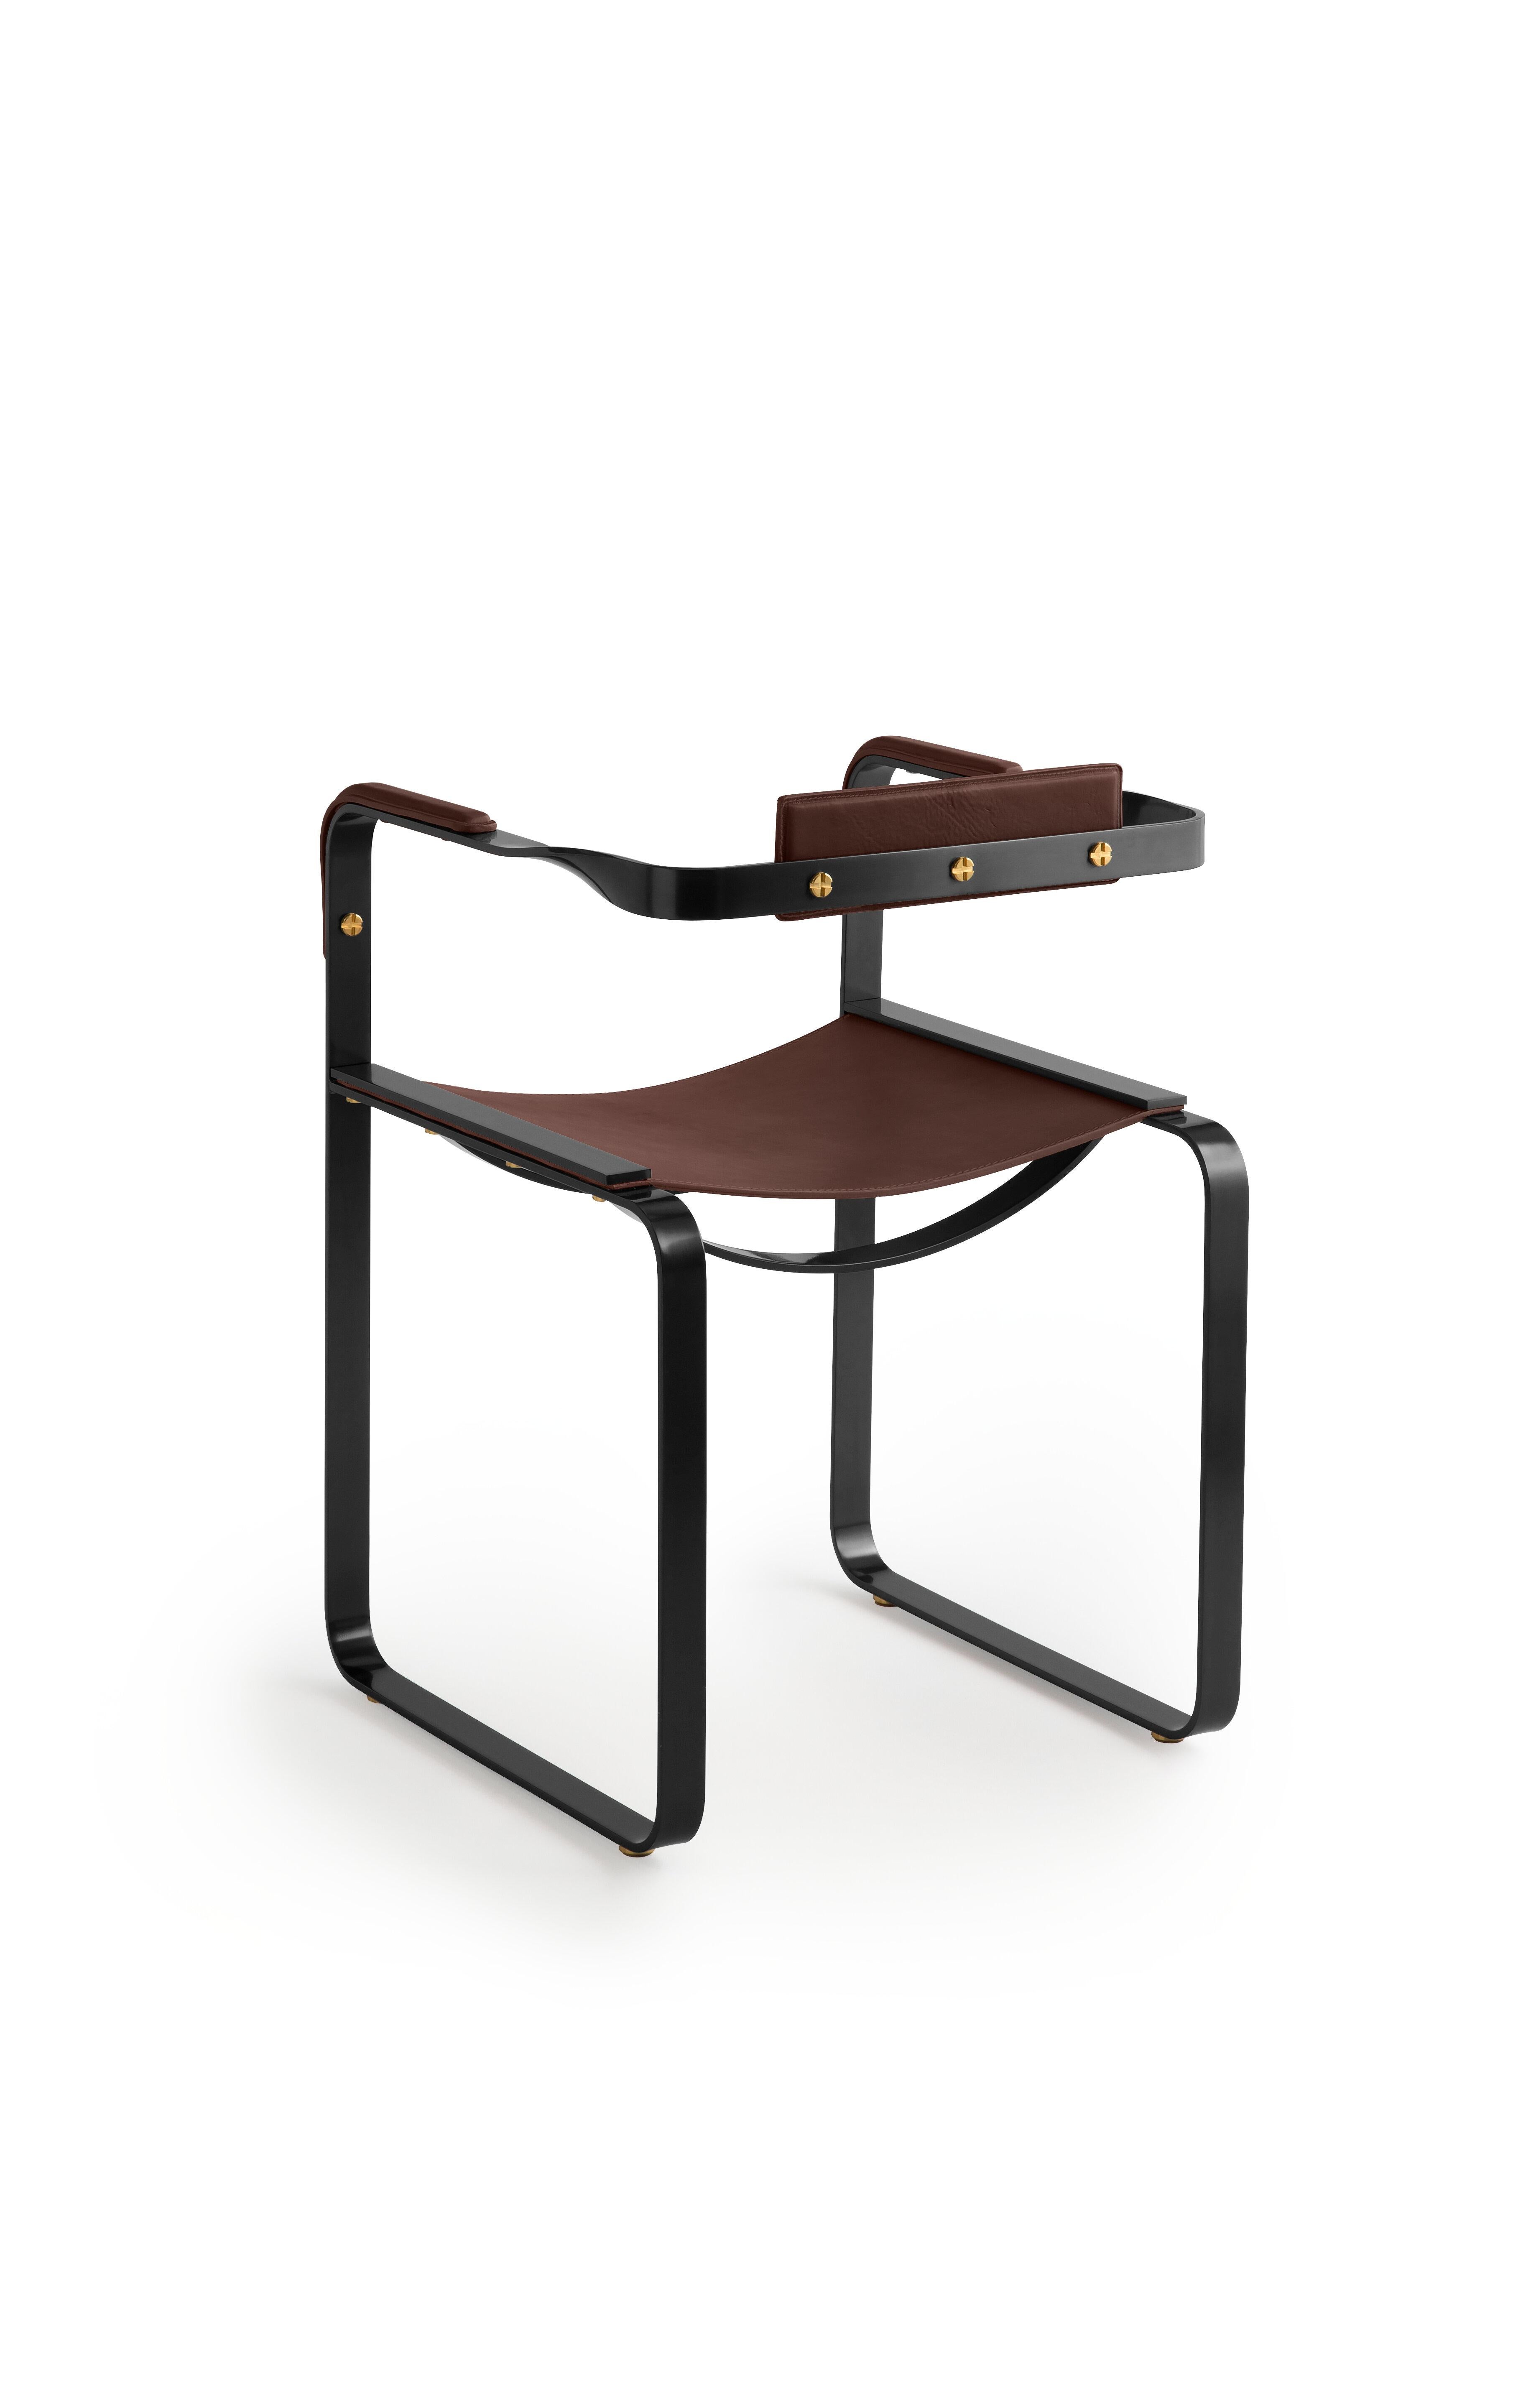 Minimalist Set of 2 Armchair, Black Smoke Steel and Dark Brown Saddle, Contemporary Design For Sale